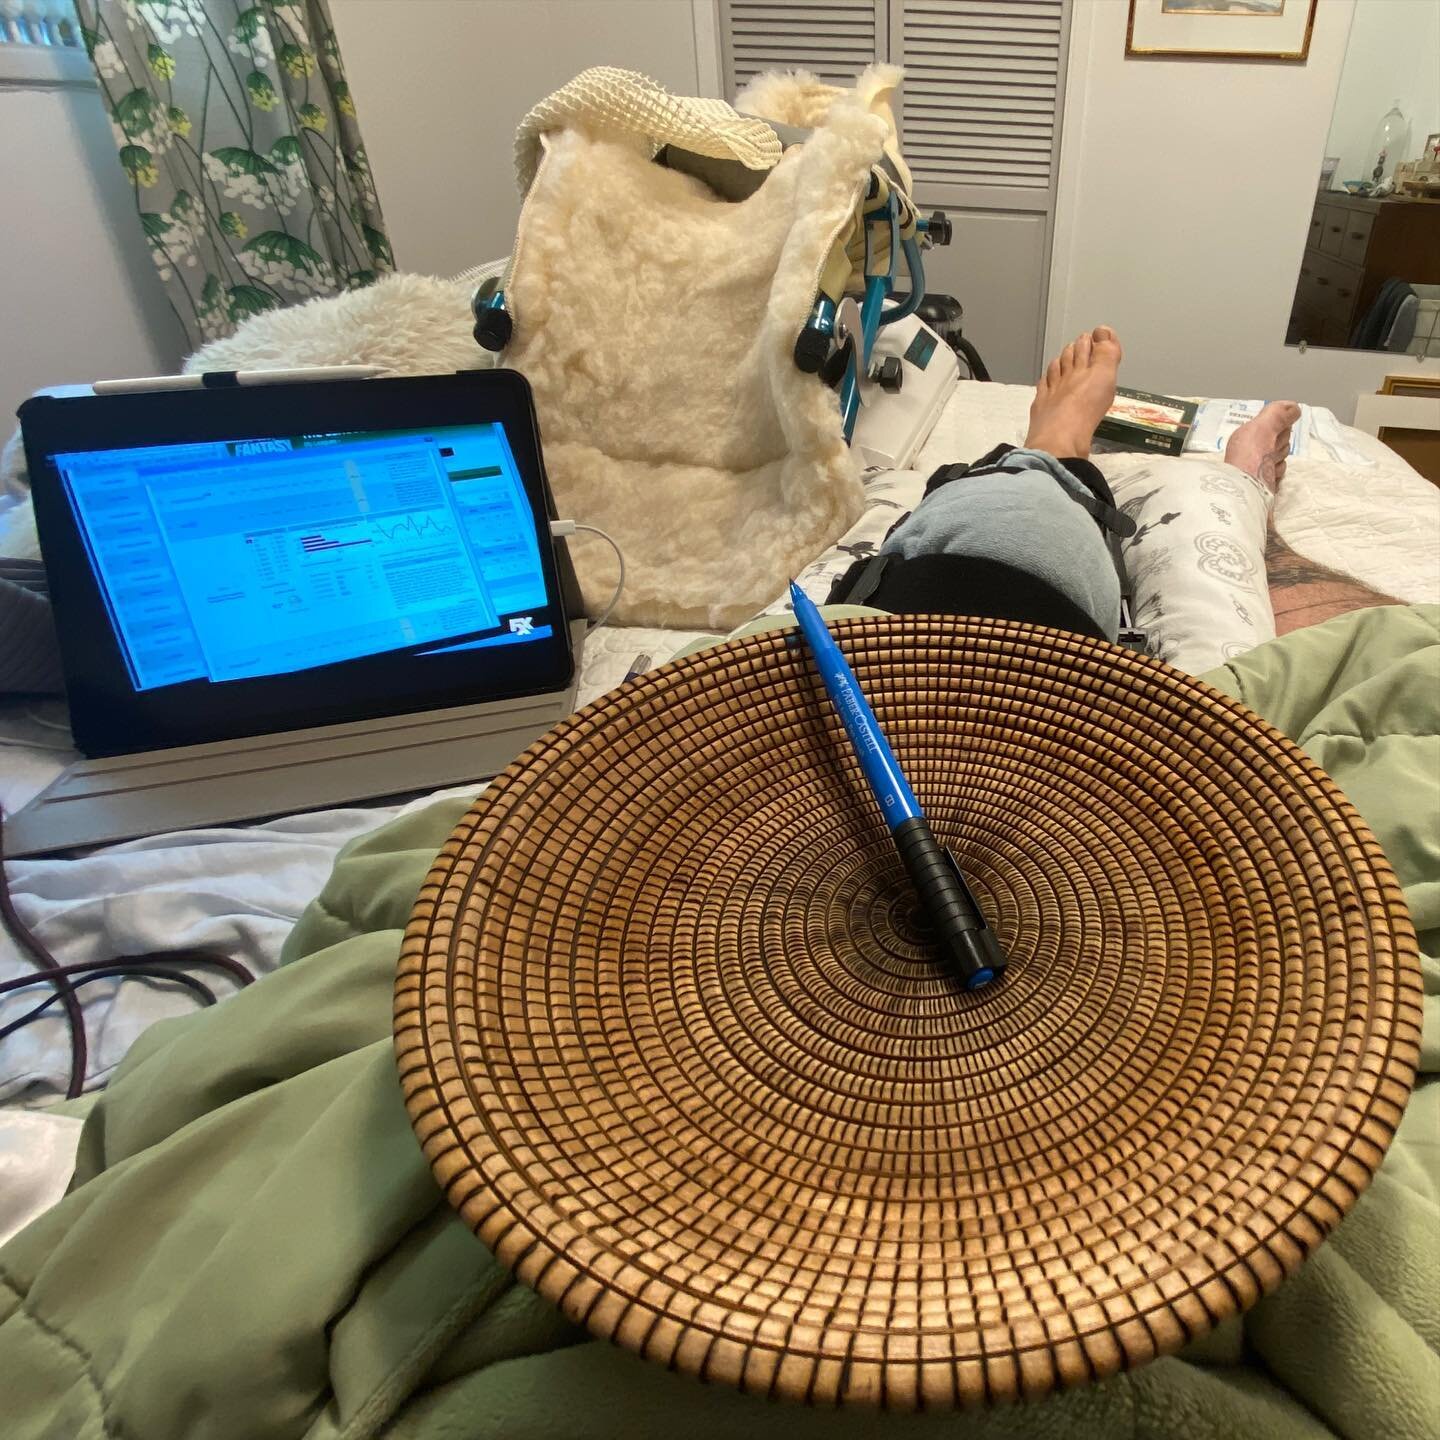 Laid up for a while after having major knee surgery. Thankfully I have a beautiful, lovely stay at home nurse (my wife) and a handful of fun projects to keep my woodworking mind busy. This will be an awesome basket illusion bowl that the wife helped 